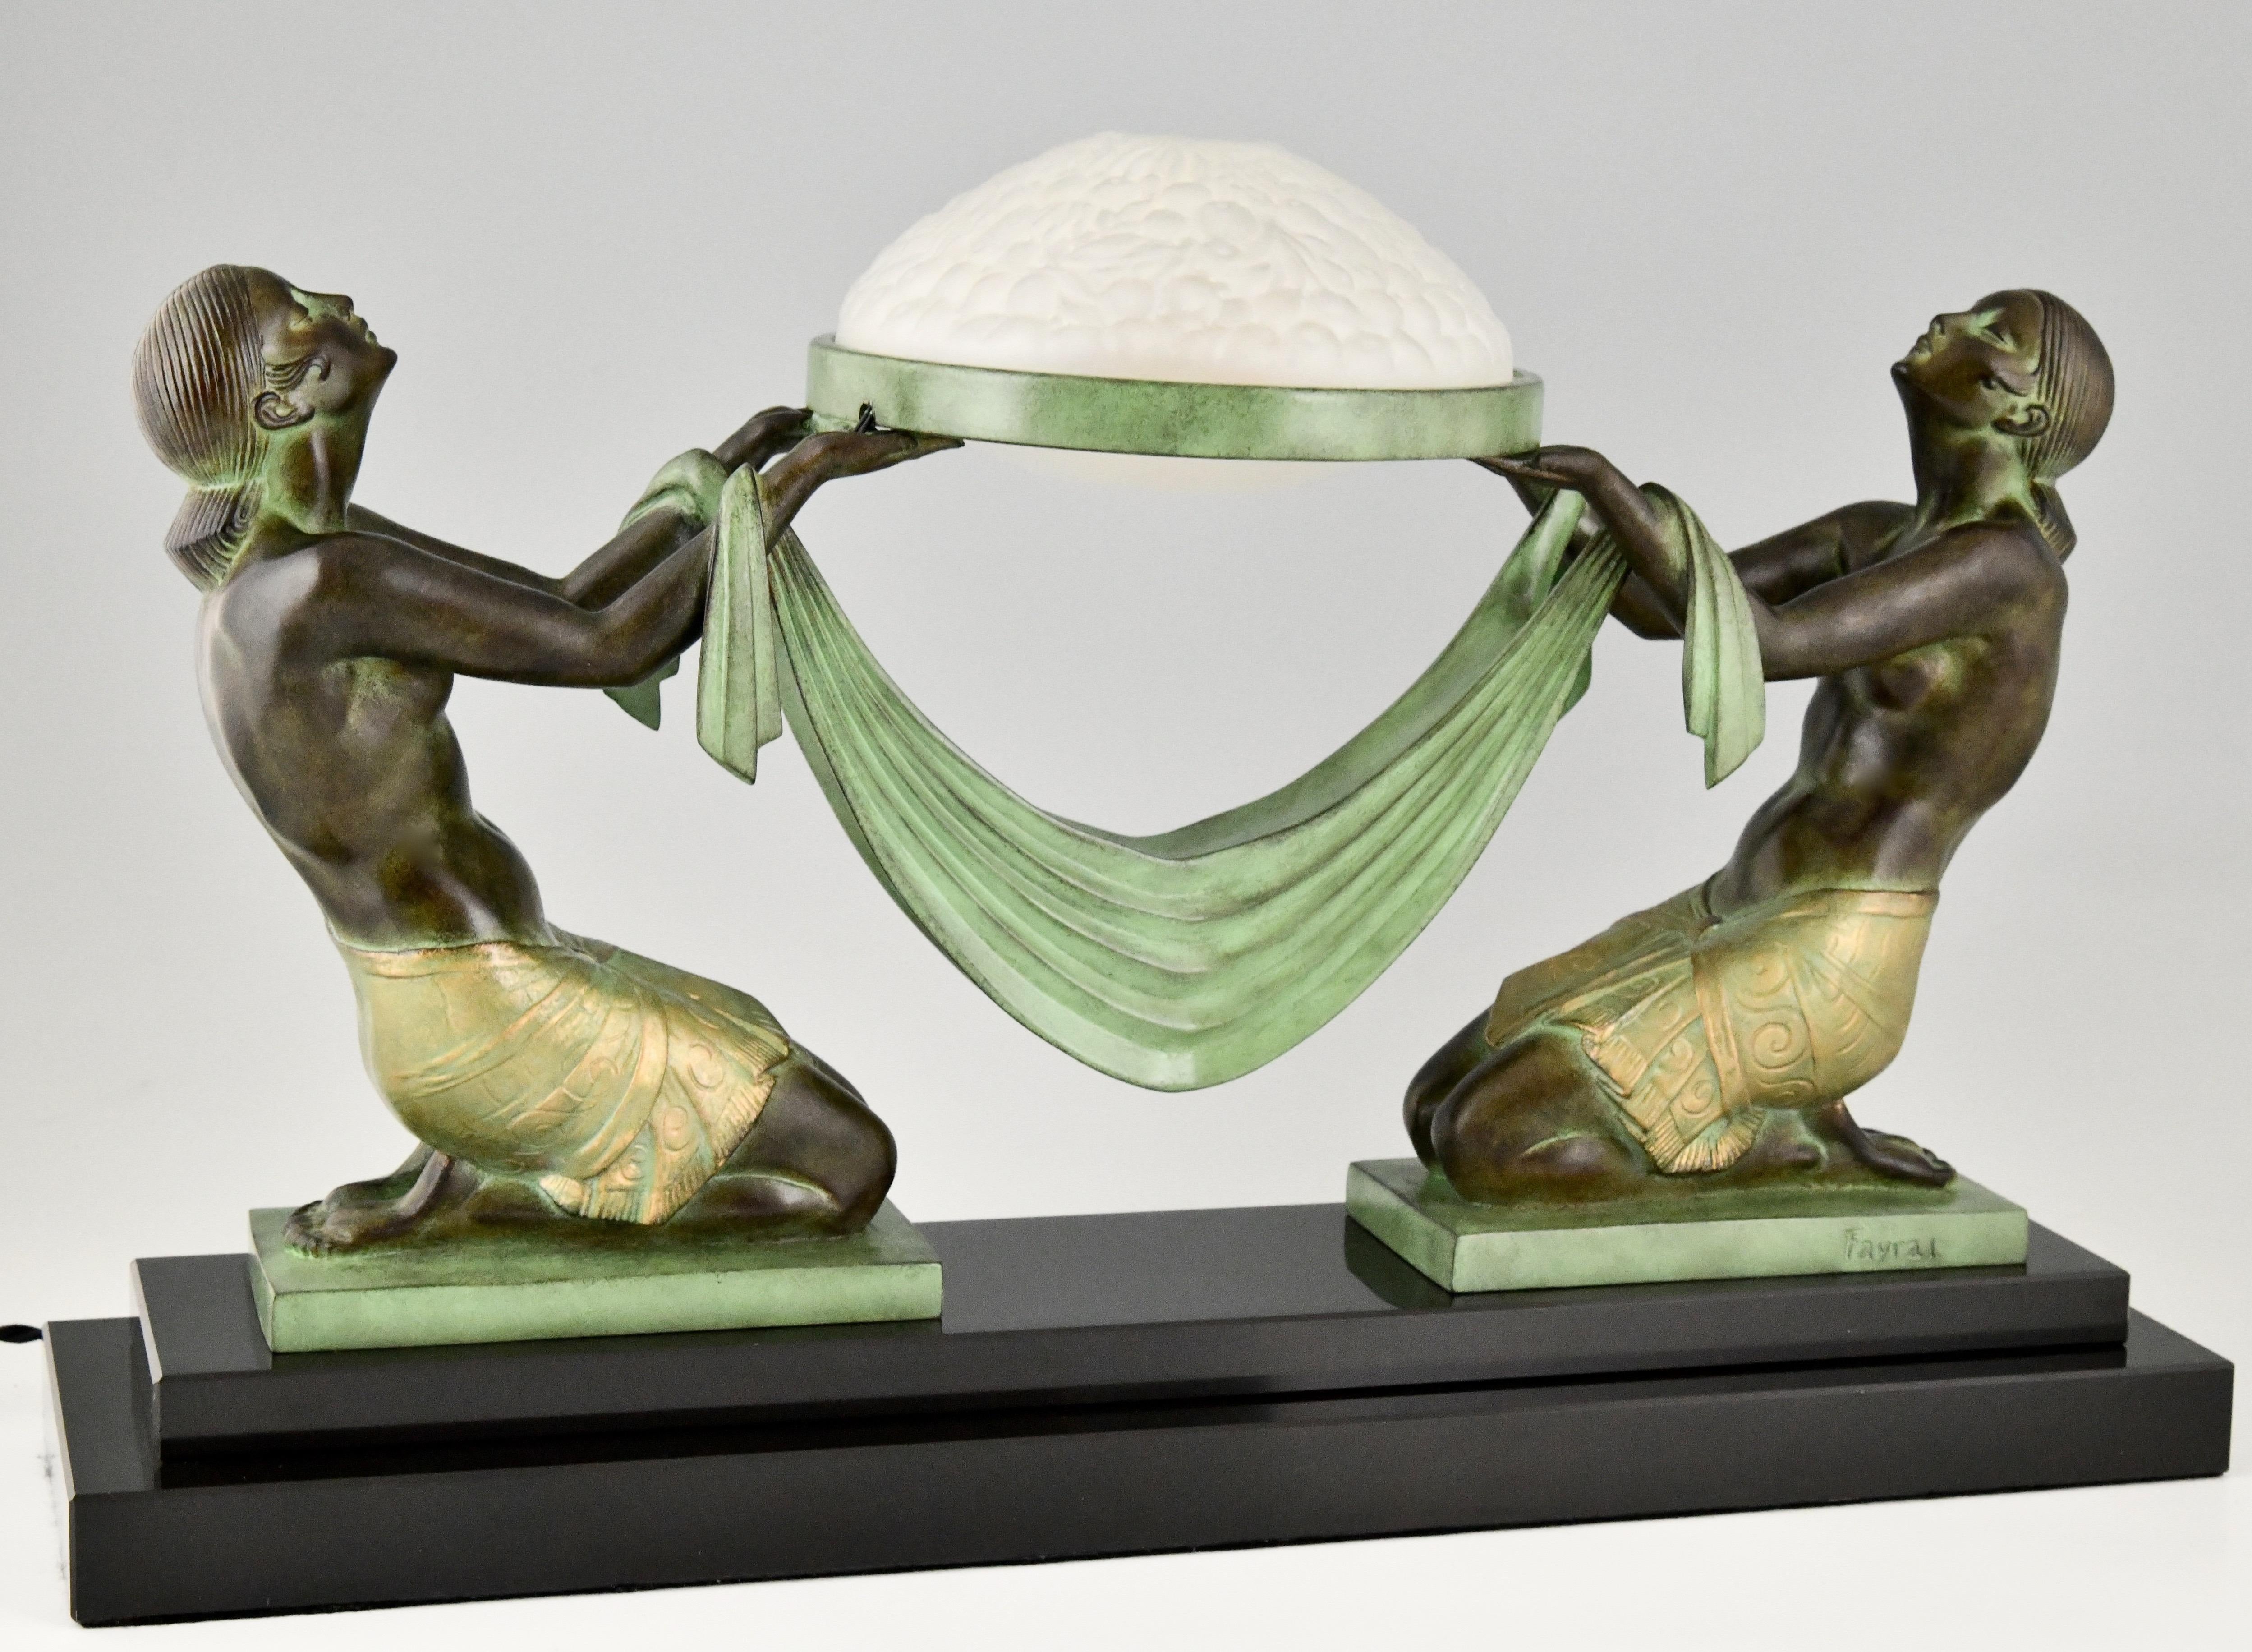 Art Deco Style Table Lamp with Two Kneeling Nudes by Fayral for Max Le Verrier For Sale 2